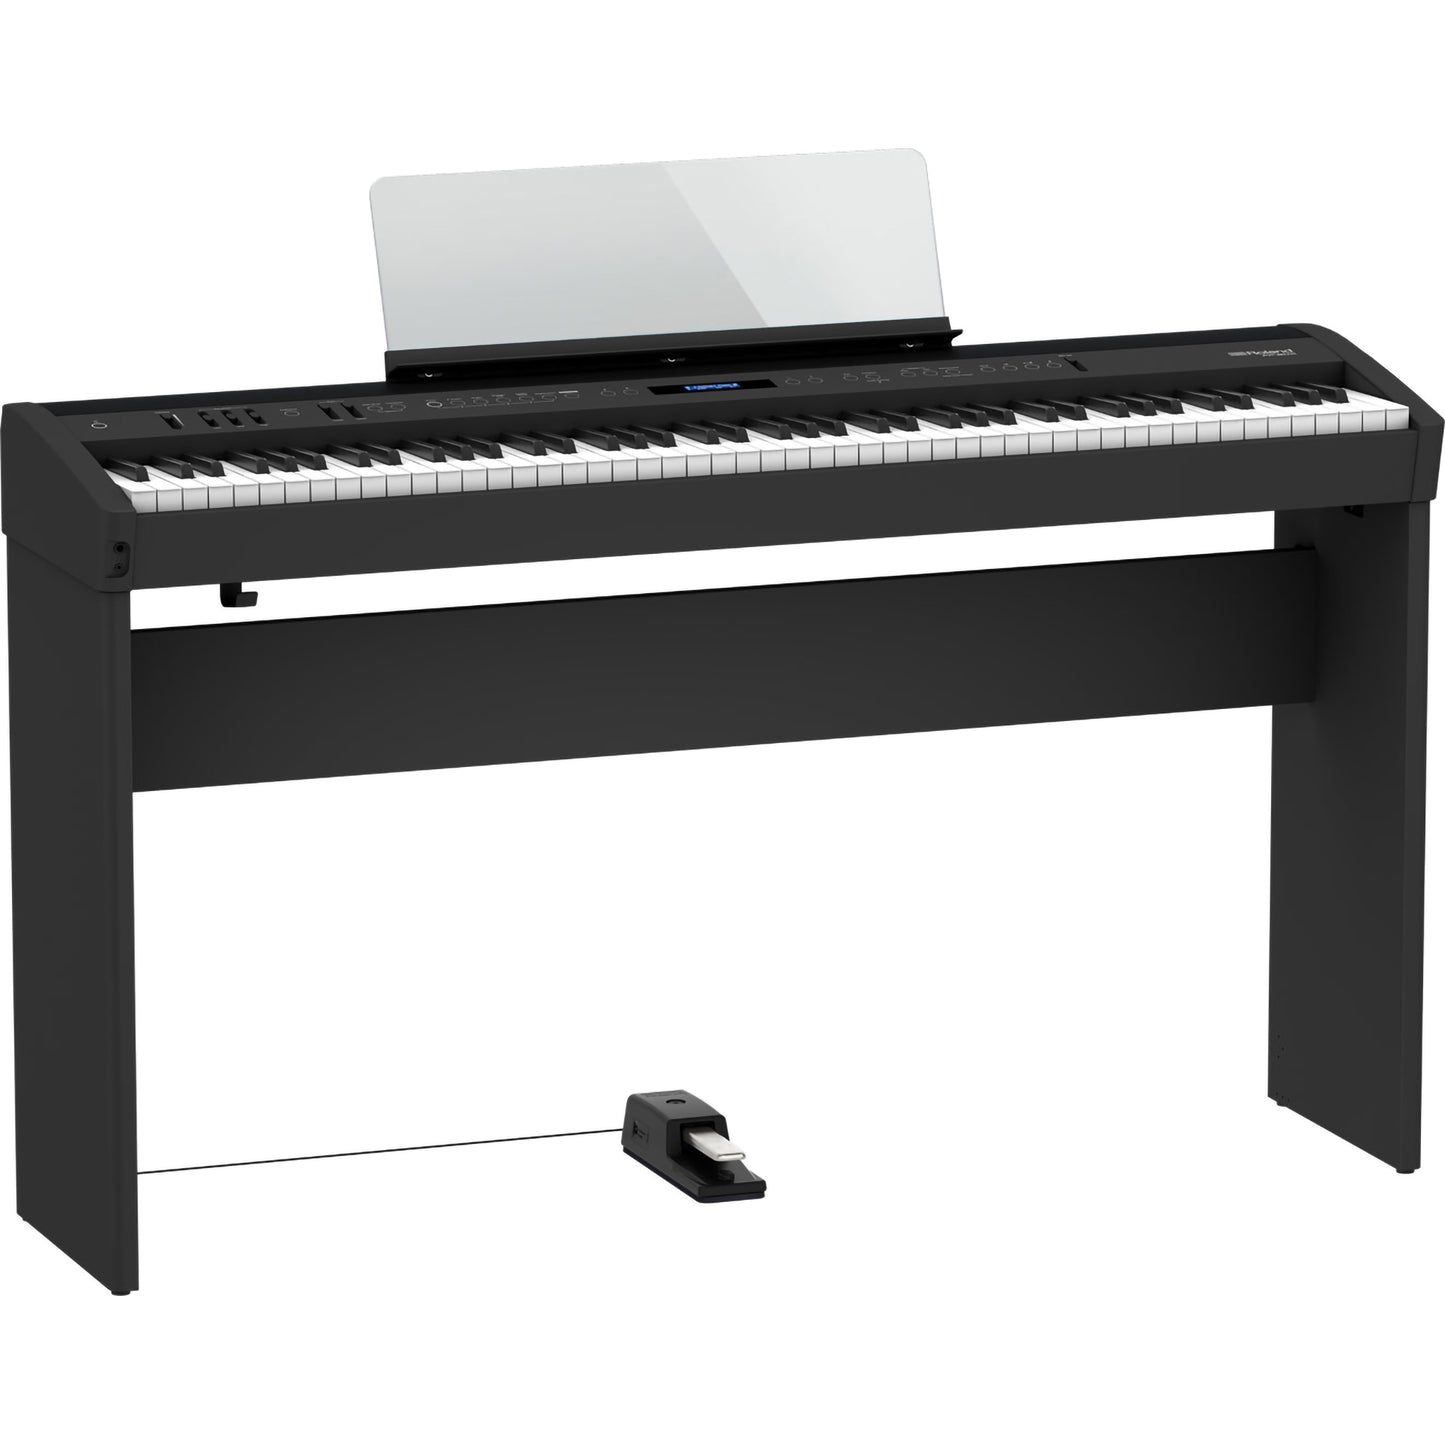 Roland FP-60X-BK Portable Piano w/ Built in Speakers, Bluetooth - Black